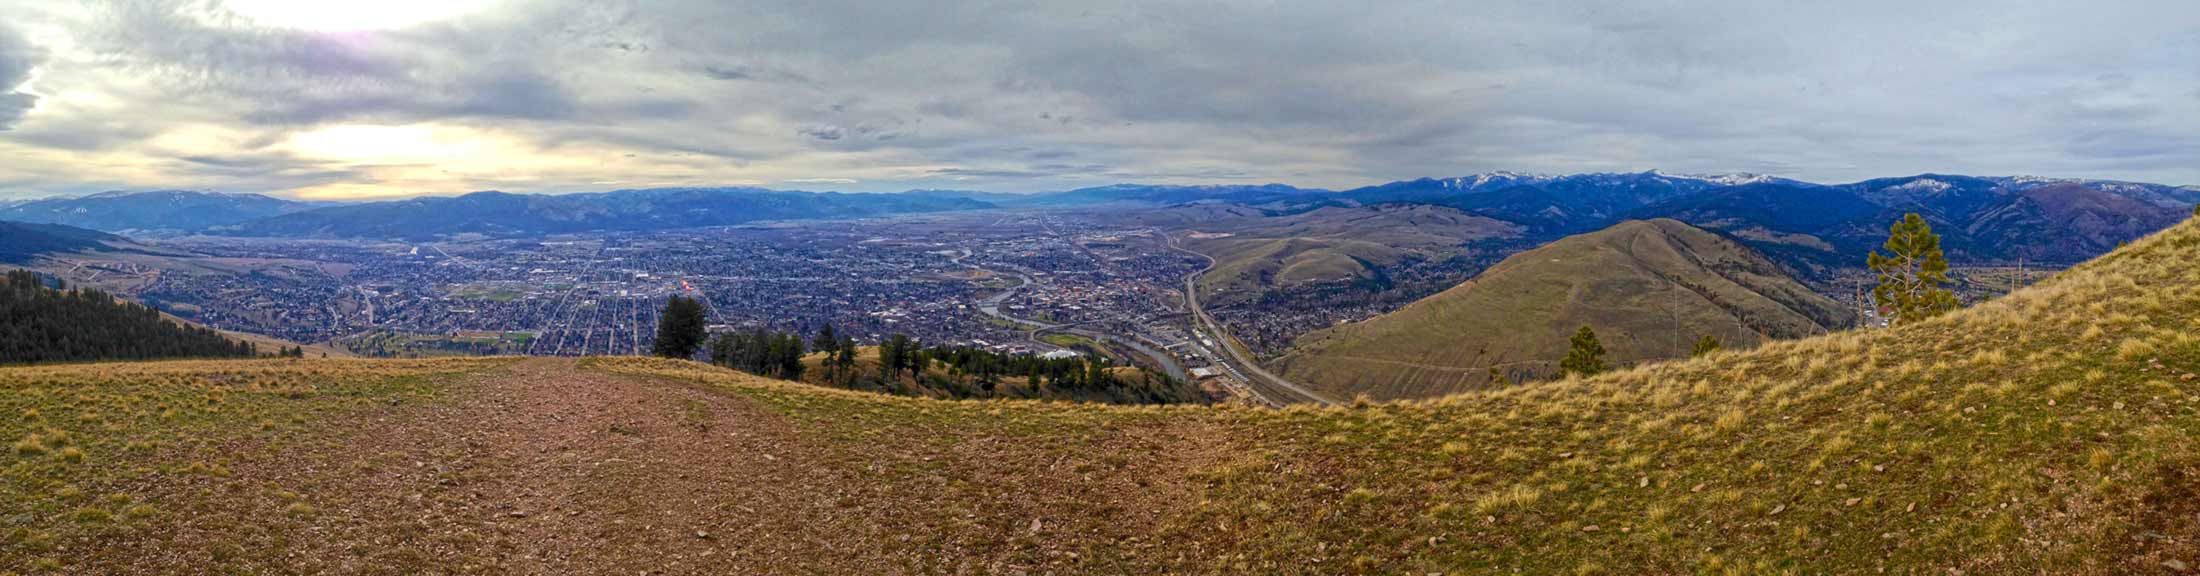 Missoula's MisCon - What is it?